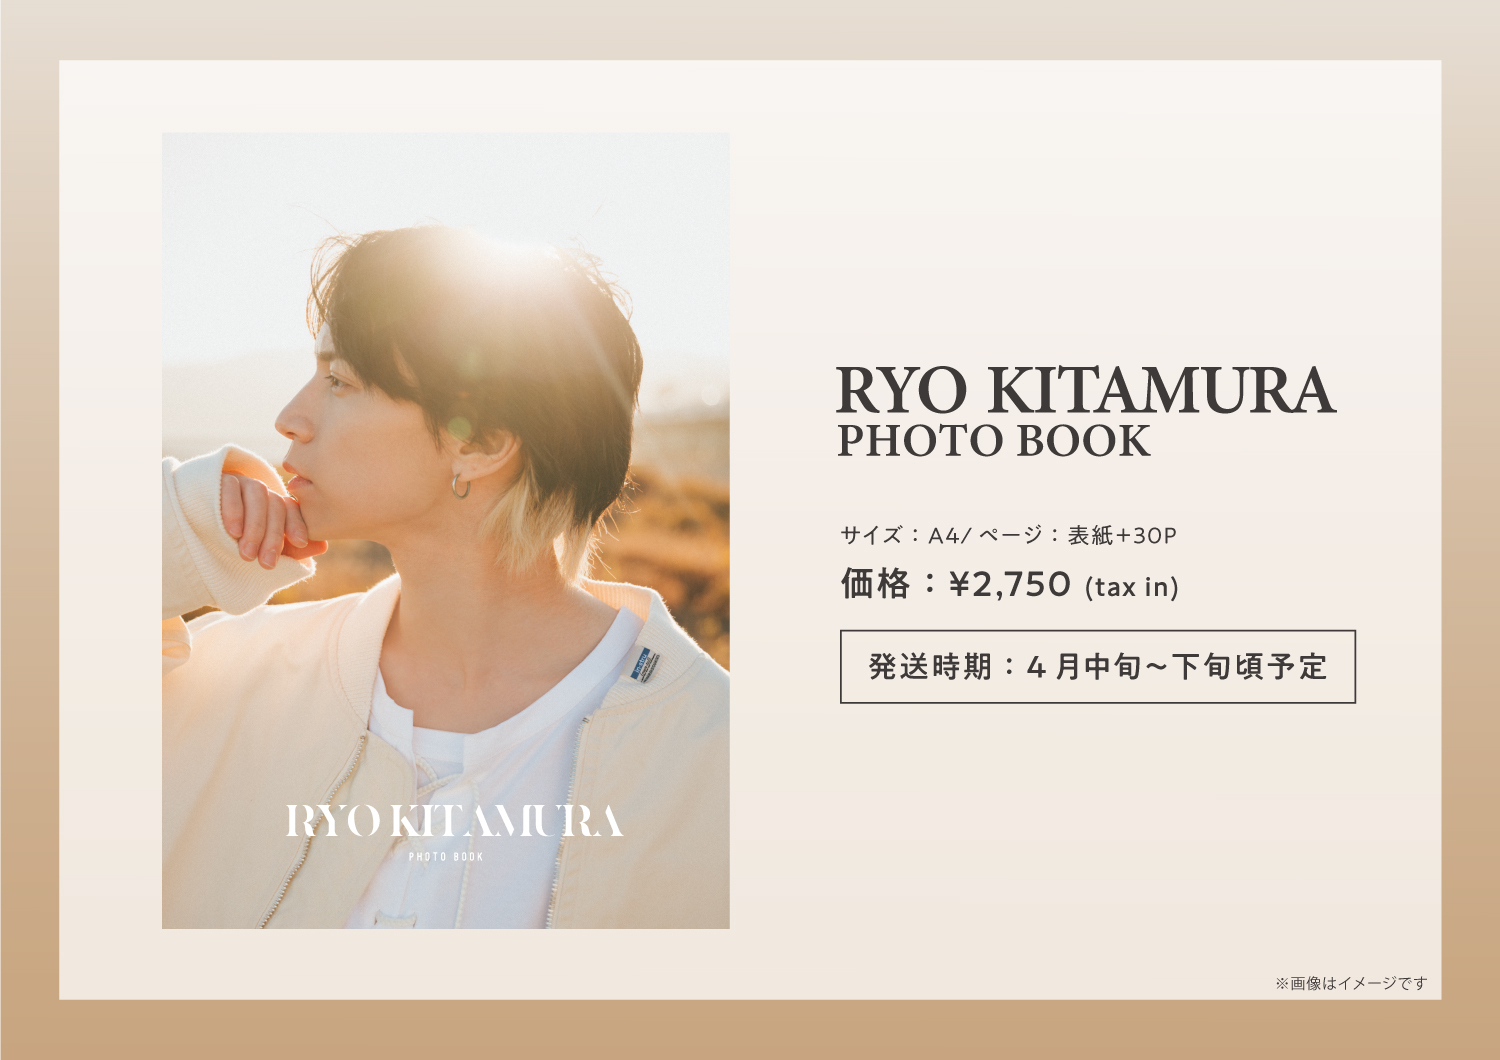 RYO KITAMURA PHOTO BOOK」オンライン予約受付のご案内 | 北村諒 OFFICIAL SITE